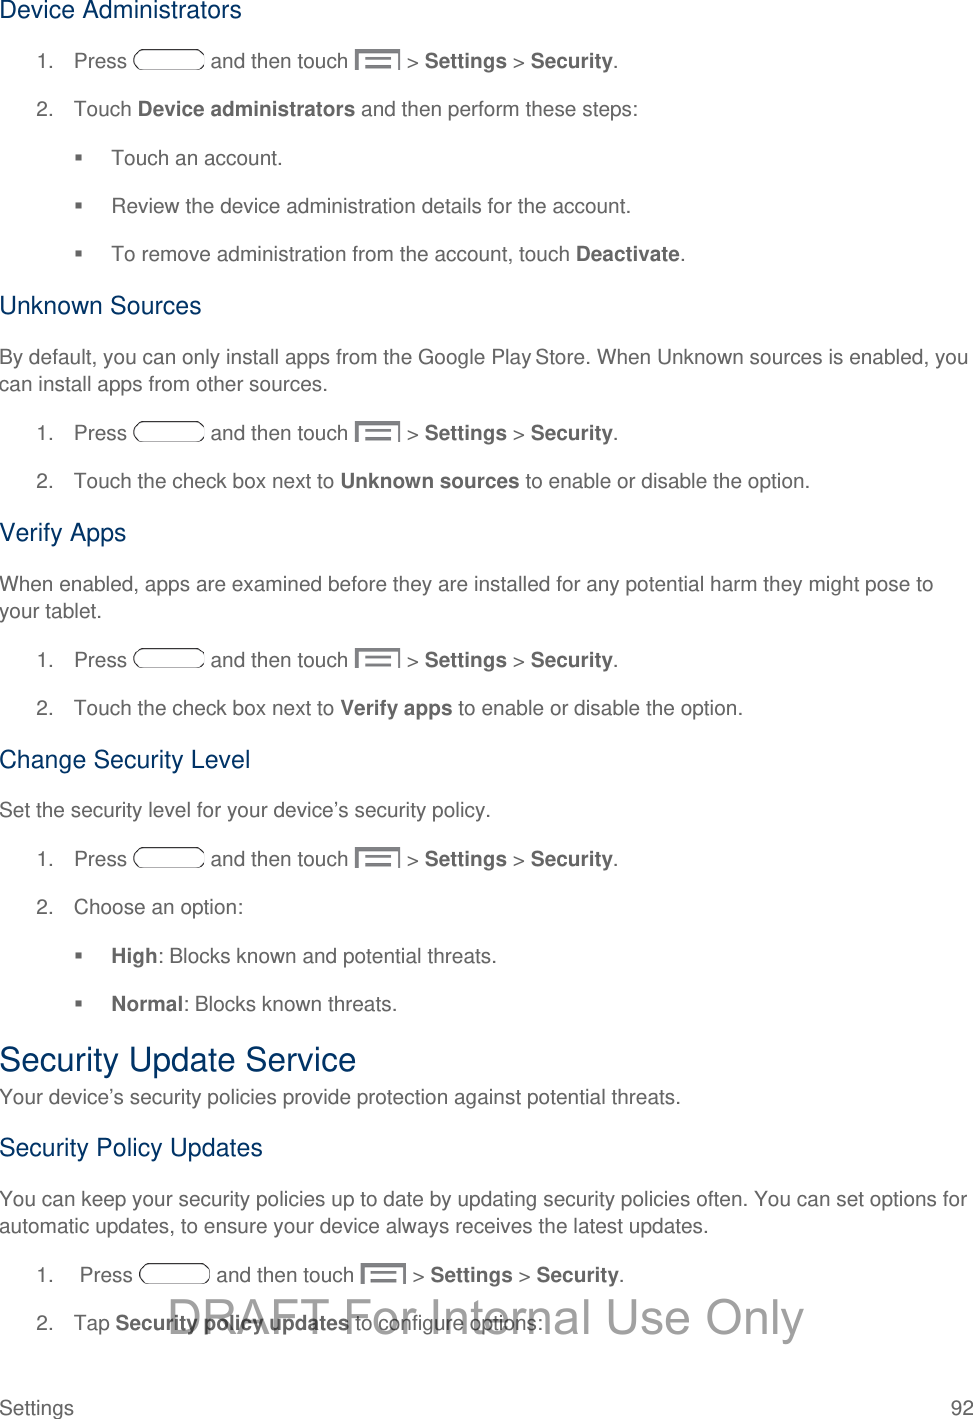  Device Administrators 1. Press   and then touch   &gt; Settings &gt; Security. 2. Touch Device administrators and then perform these steps:  Touch an account.  Review the device administration details for the account.  To remove administration from the account, touch Deactivate. Unknown Sources By default, you can only install apps from the Google Play Store. When Unknown sources is enabled, you can install apps from other sources. 1. Press   and then touch   &gt; Settings &gt; Security. 2. Touch the check box next to Unknown sources to enable or disable the option. Verify Apps When enabled, apps are examined before they are installed for any potential harm they might pose to your tablet.  1. Press   and then touch   &gt; Settings &gt; Security. 2. Touch the check box next to Verify apps to enable or disable the option. Change Security Level Set the security level for your device’s security policy. 1. Press   and then touch   &gt; Settings &gt; Security. 2. Choose an option:   High: Blocks known and potential threats.  Normal: Blocks known threats. Security Update Service Your device’s security policies provide protection against potential threats.  Security Policy Updates You can keep your security policies up to date by updating security policies often. You can set options for automatic updates, to ensure your device always receives the latest updates. 1.   Press   and then touch   &gt; Settings &gt; Security. 2. Tap Security policy updates to configure options: Settings 92 DRAFT For Internal Use Only